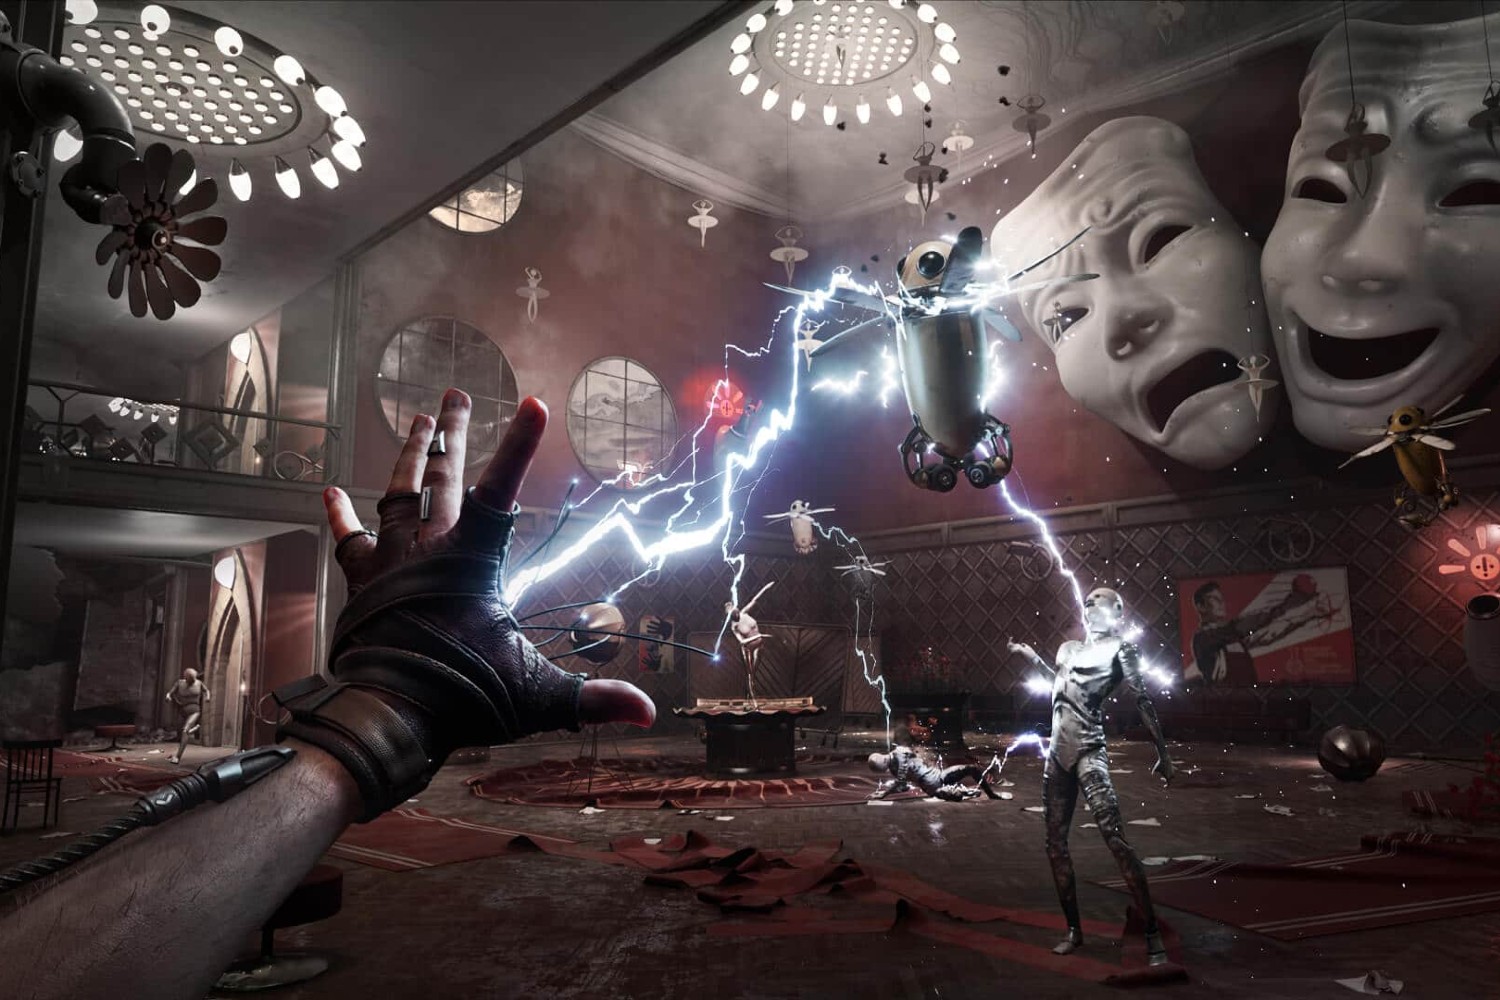 Atomic Heart review - confusion and fear reflects the growing concerns of  an industry